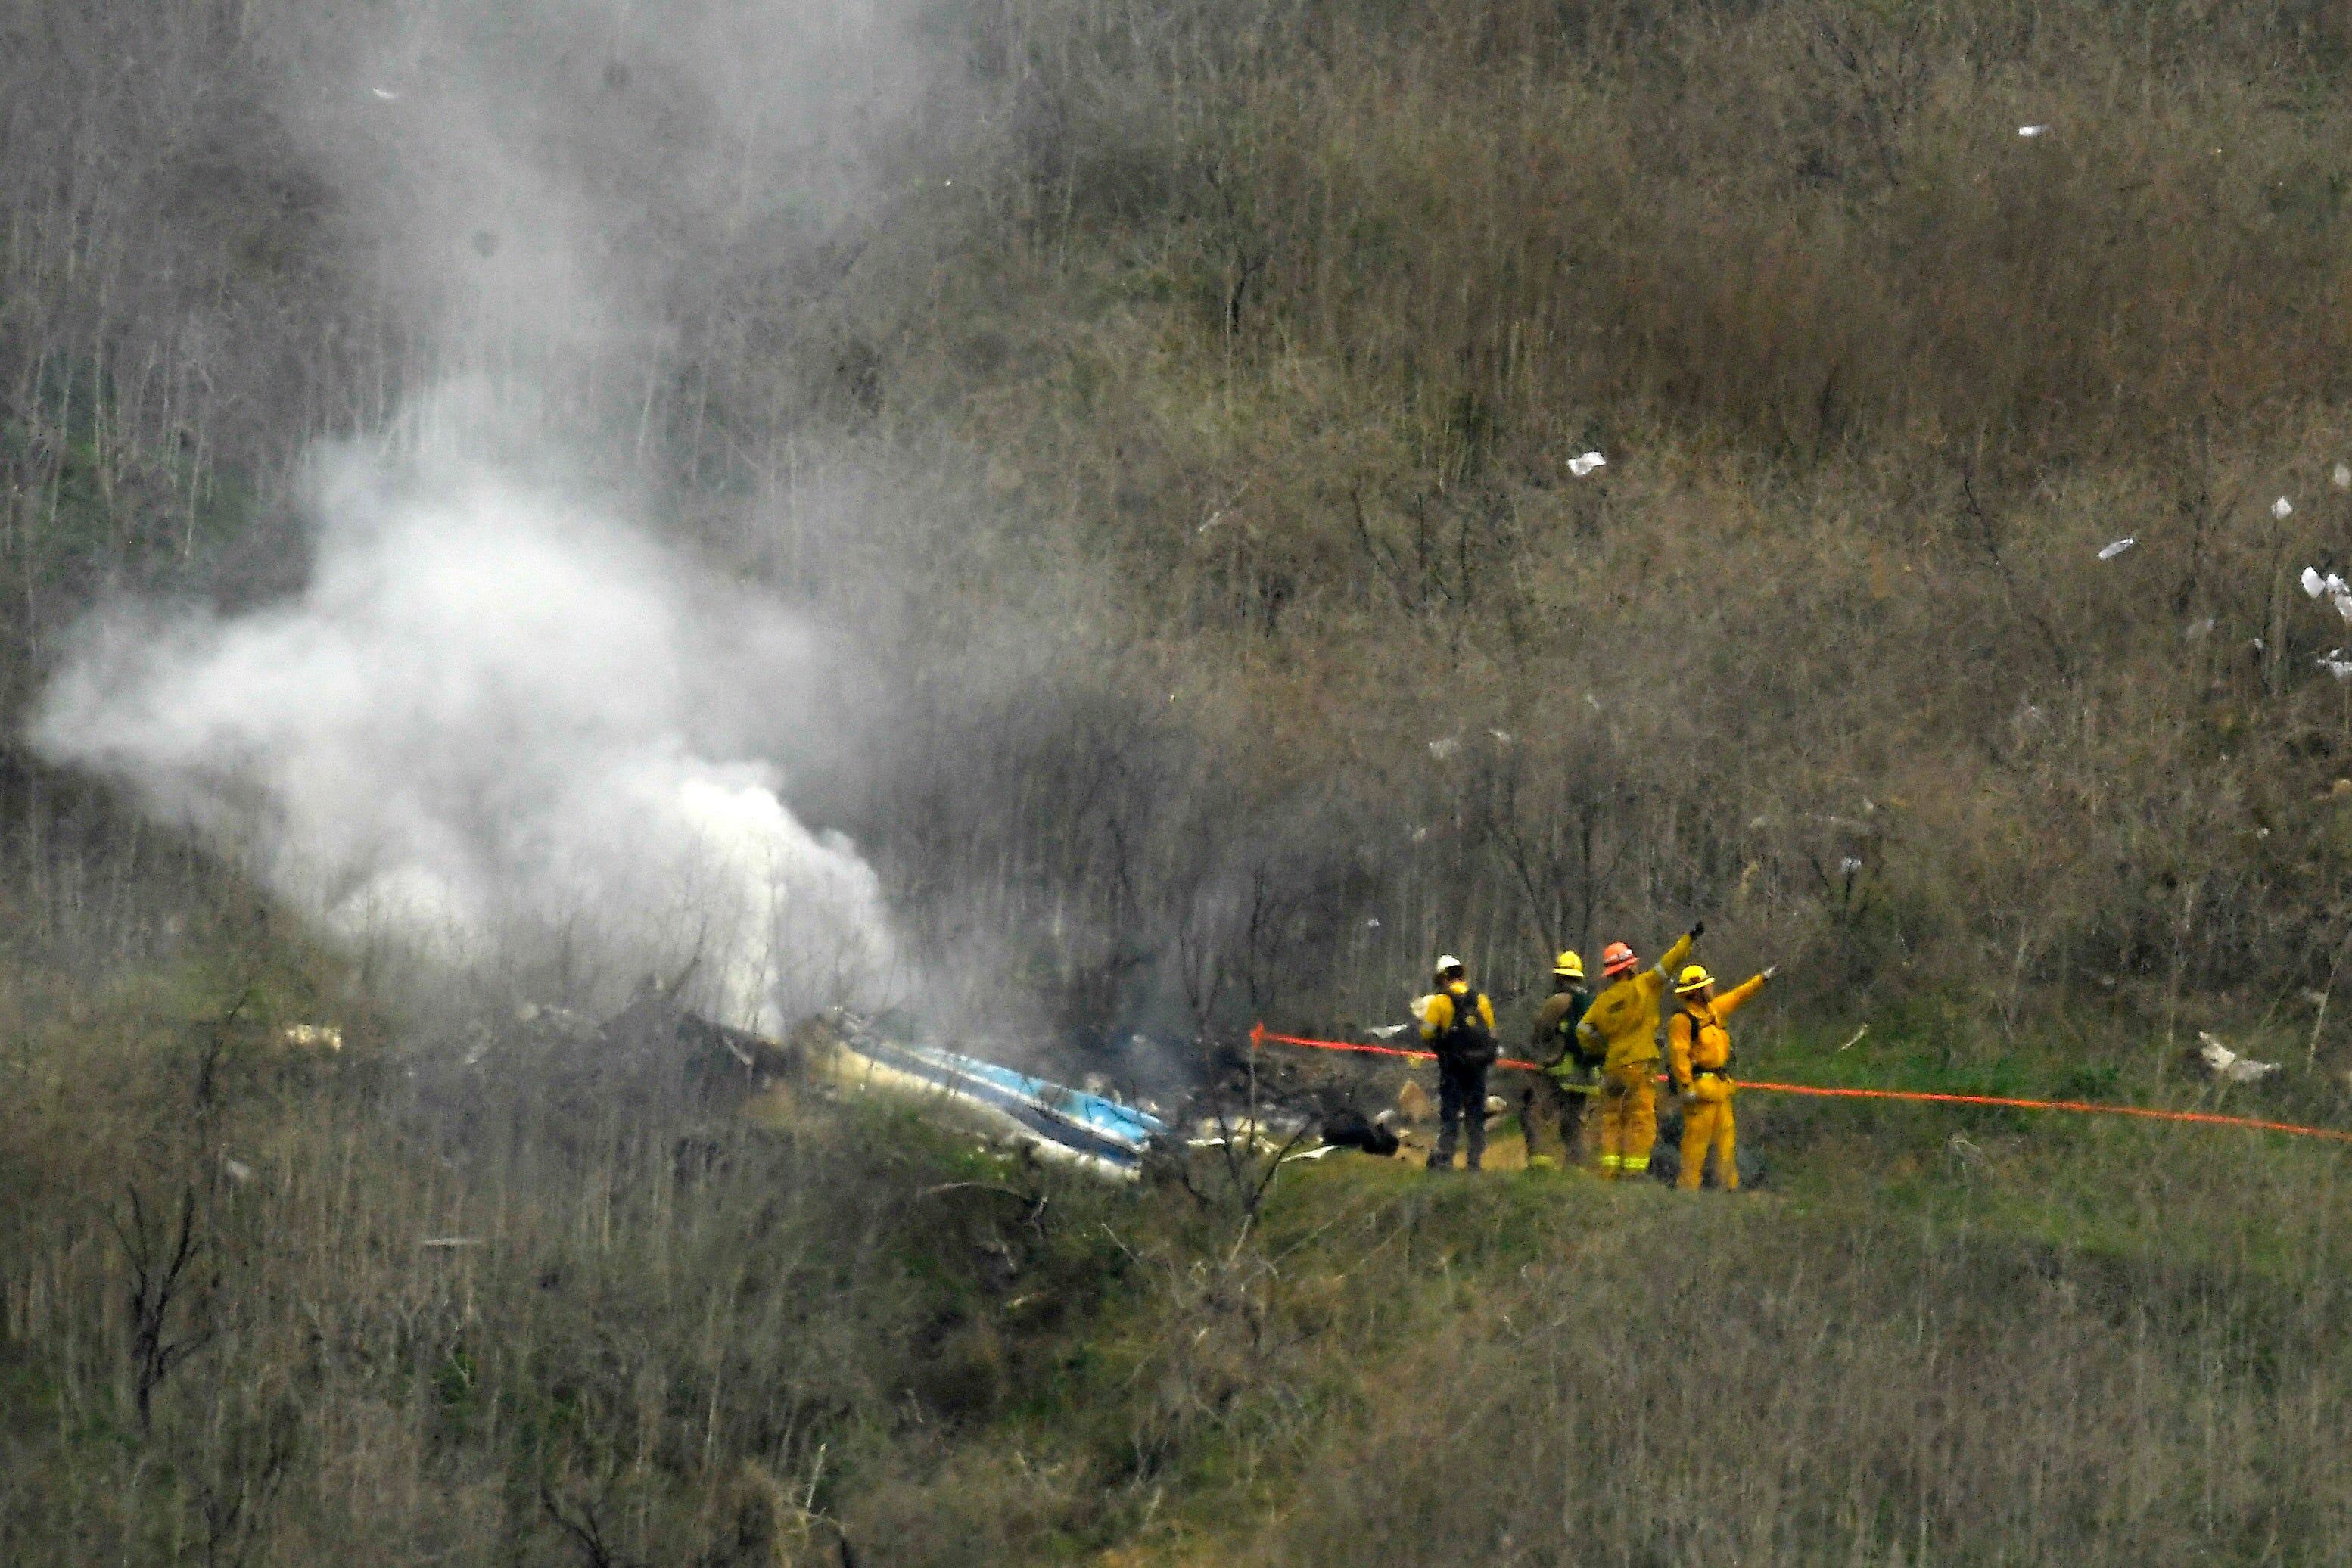 Firefighters work the scene of a helicopter crash in Calabasas, California where Kobe Bryant and eight others died.